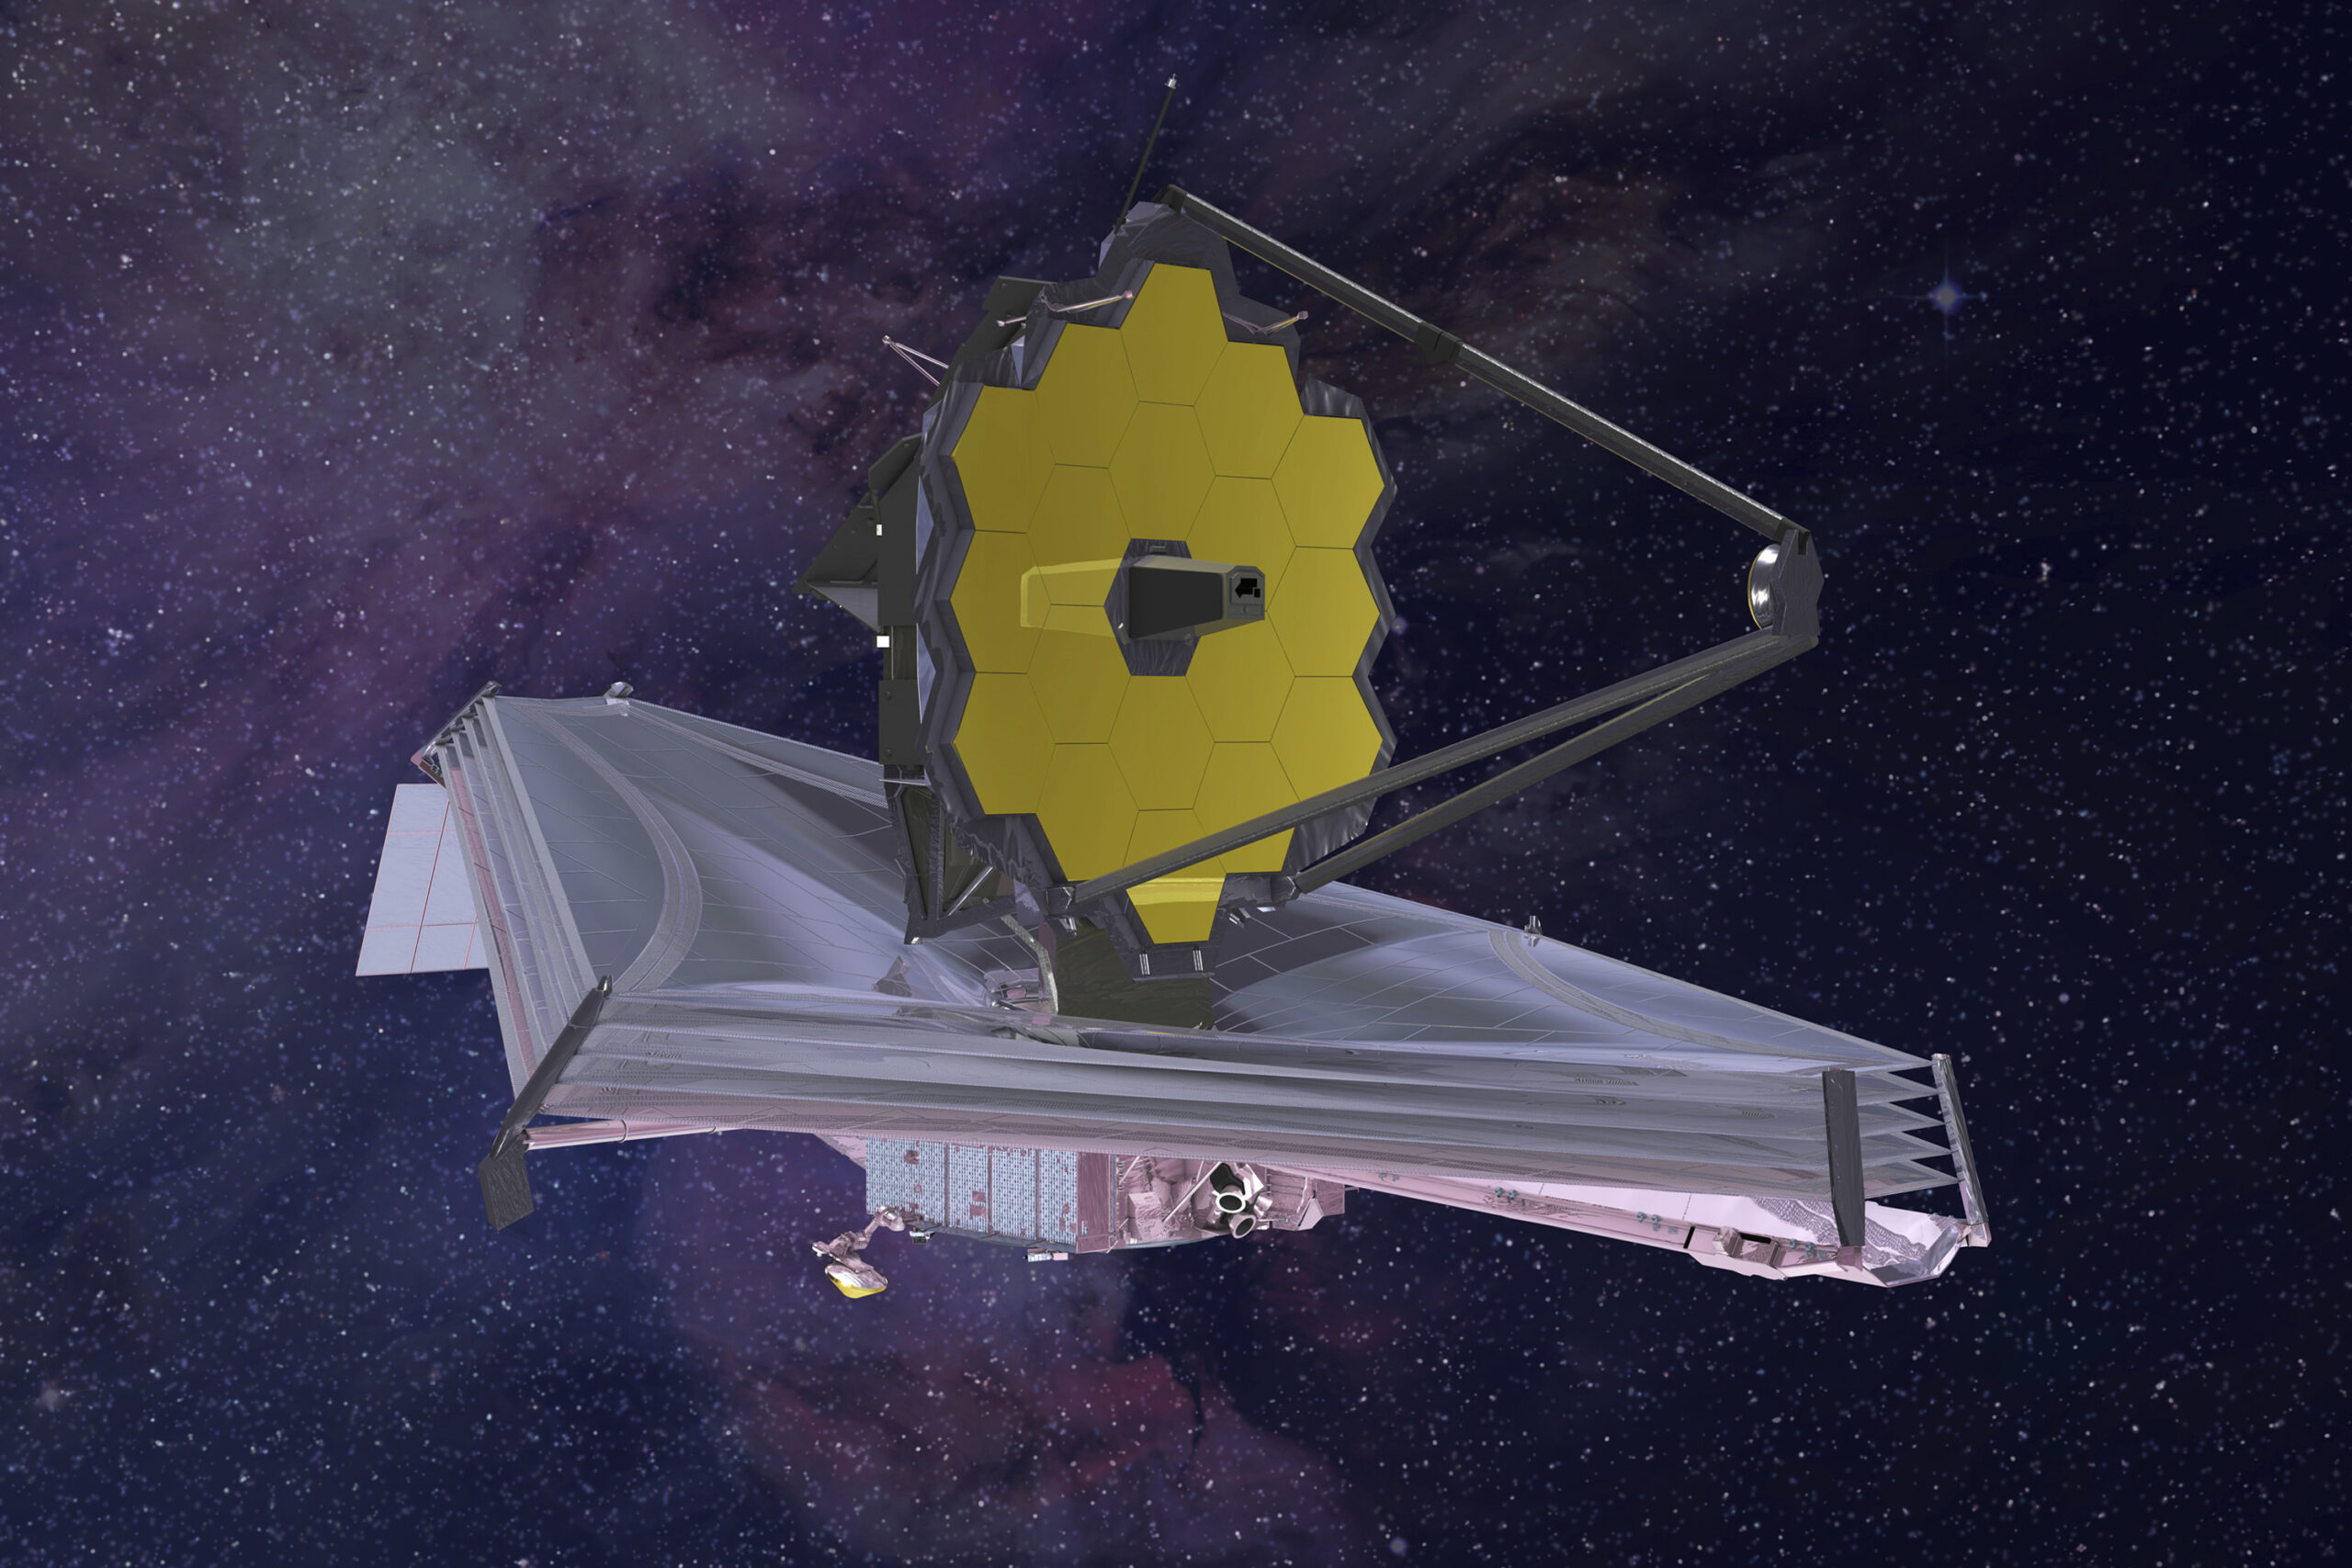 FILE - This 2015 artist's rendering provided by Northrop Grumman via NASA shows the James Webb Space Telescope. On Monday, Jan. 24, 2022, the world’s biggest and most powerful space telescope reached its final destination 1 million miles away, one month after launching on a quest to behold the dawn of the universe. (Northrop Grumman/NASA via AP)